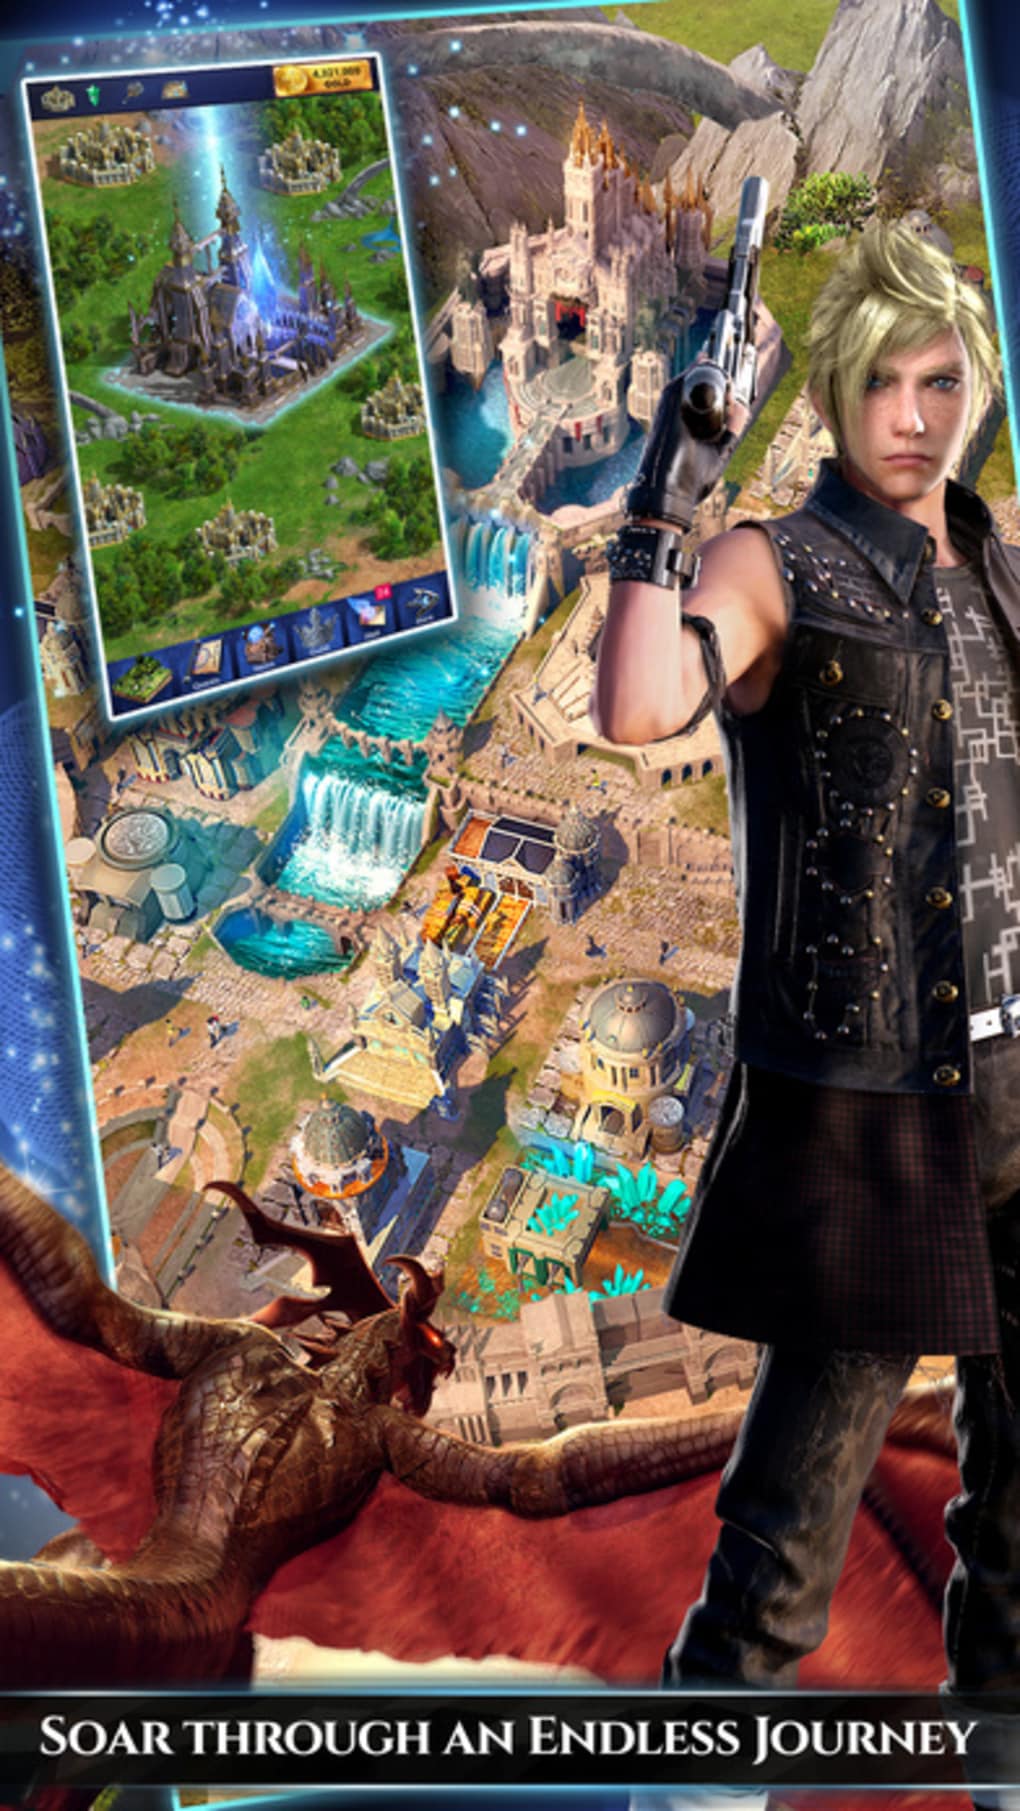 Final Fantasy XV Is Getting A Mobile-Only MMO Spinoff, Coming